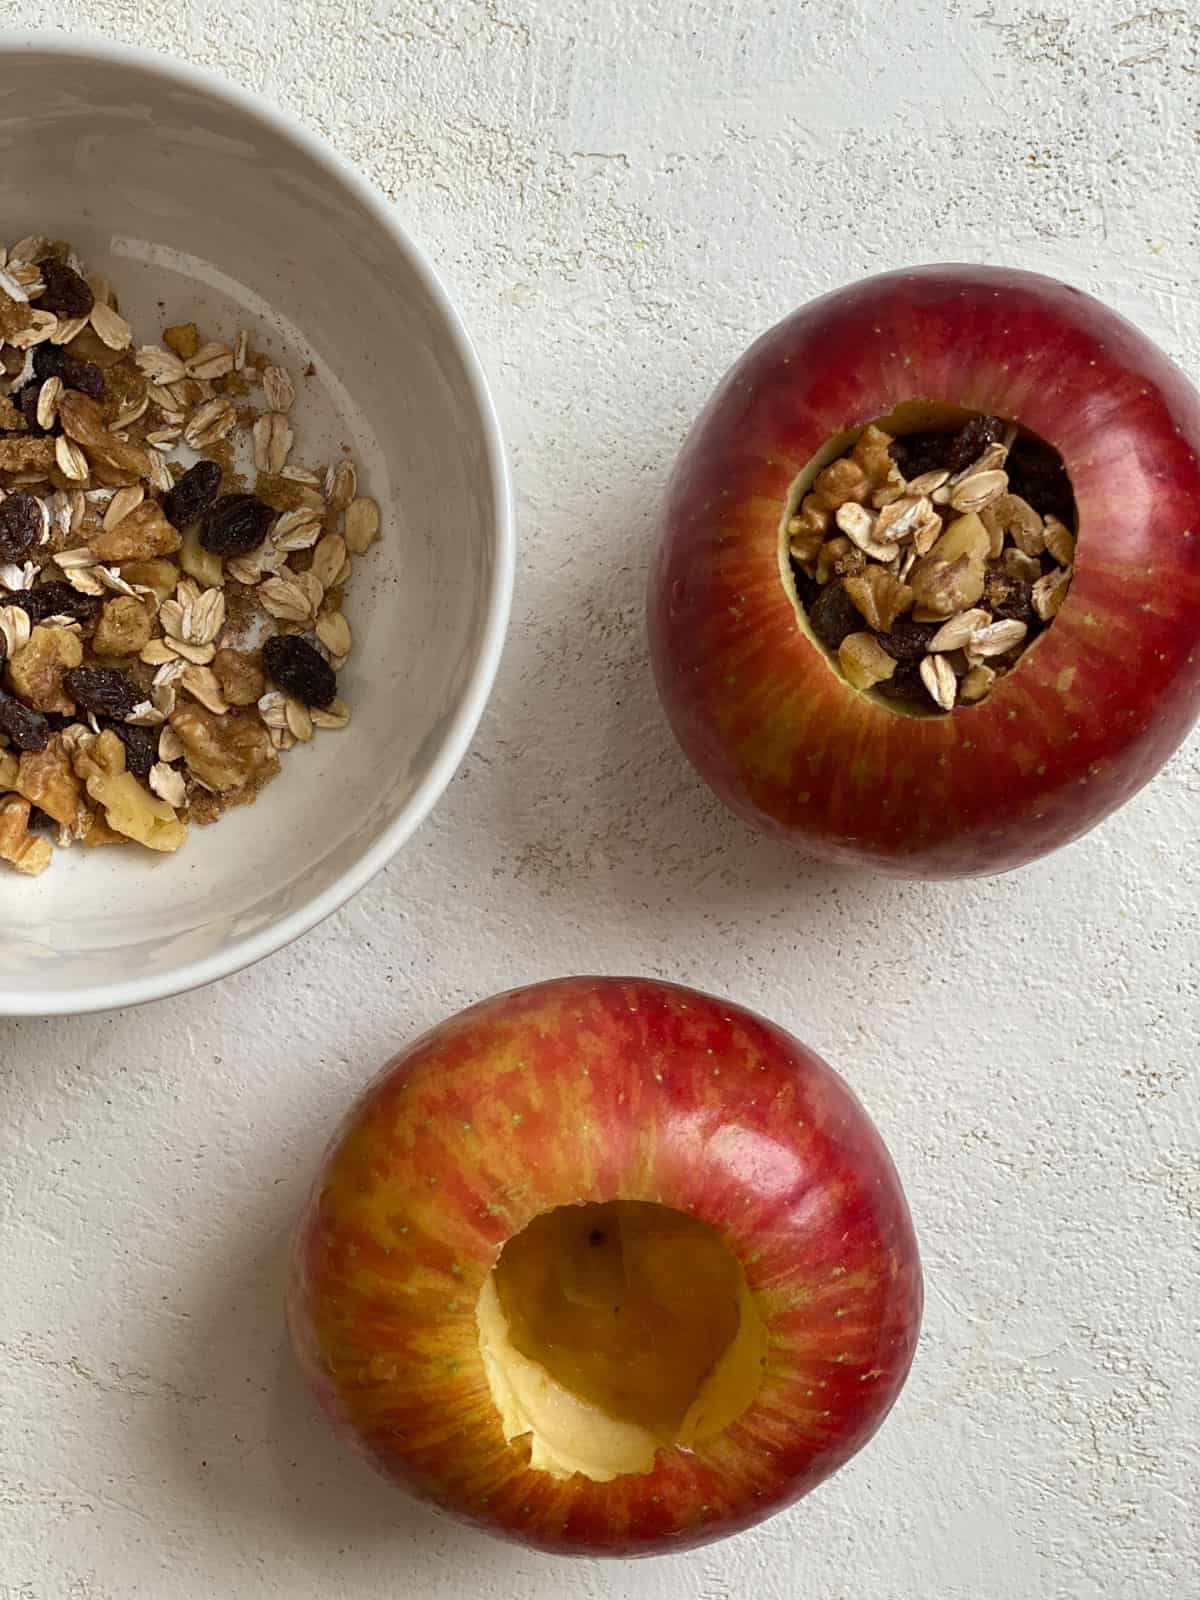 one apple with filling inside alongside a filling-less apple alongside a bowl of filling for stuffed baked apples against a white surface